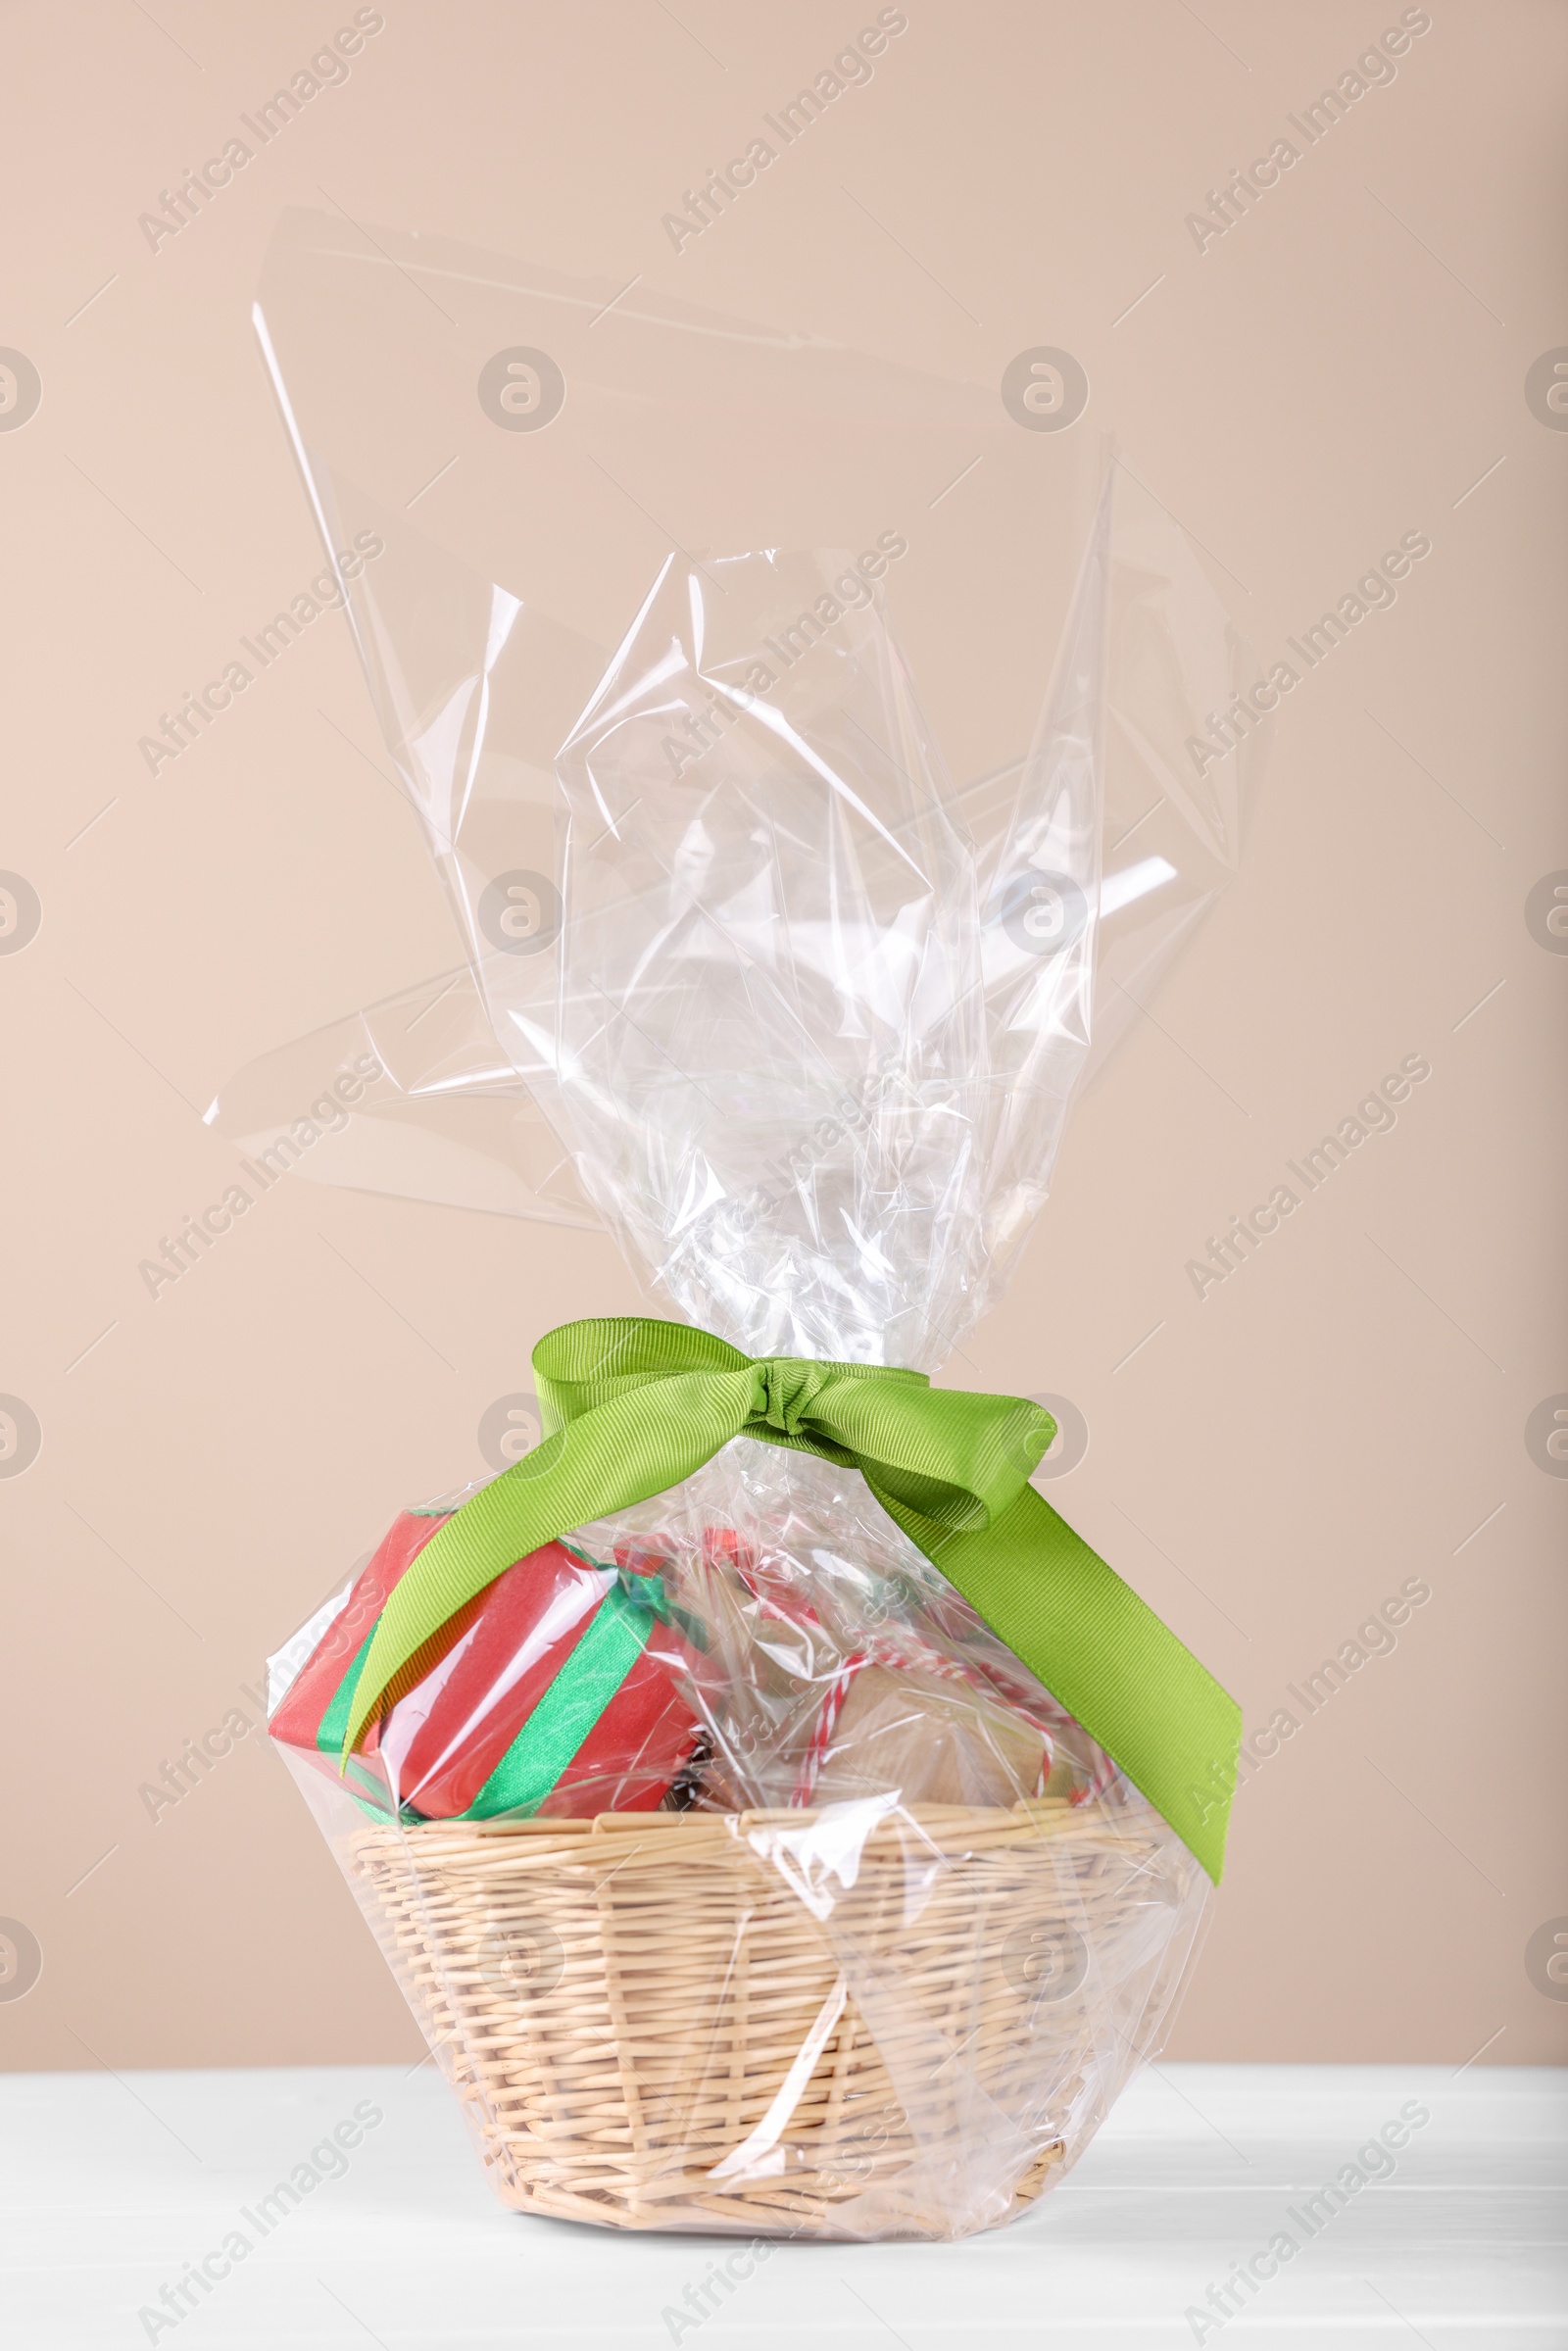 Photo of Wicker basket full of gift boxes on white wooden table against beige background